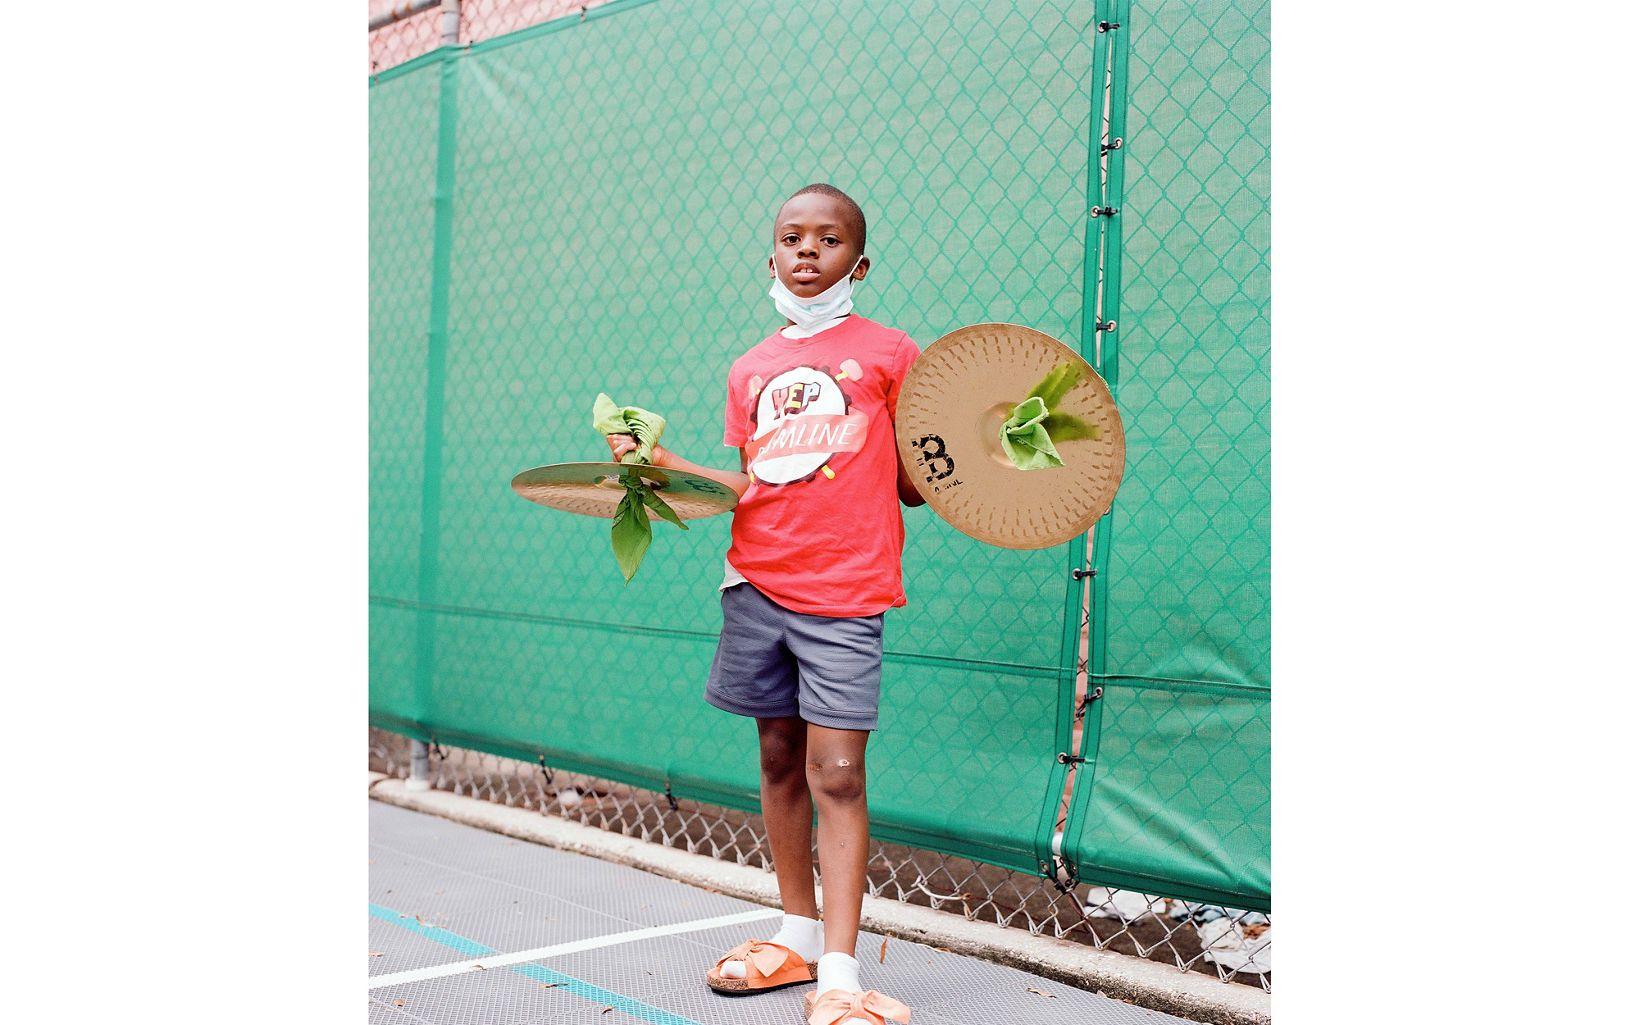 A young boy in a red t-shirt and shorts poses with two cymbals held out to his sides. he is standing outdoors in front of fencing covered in green mesh.